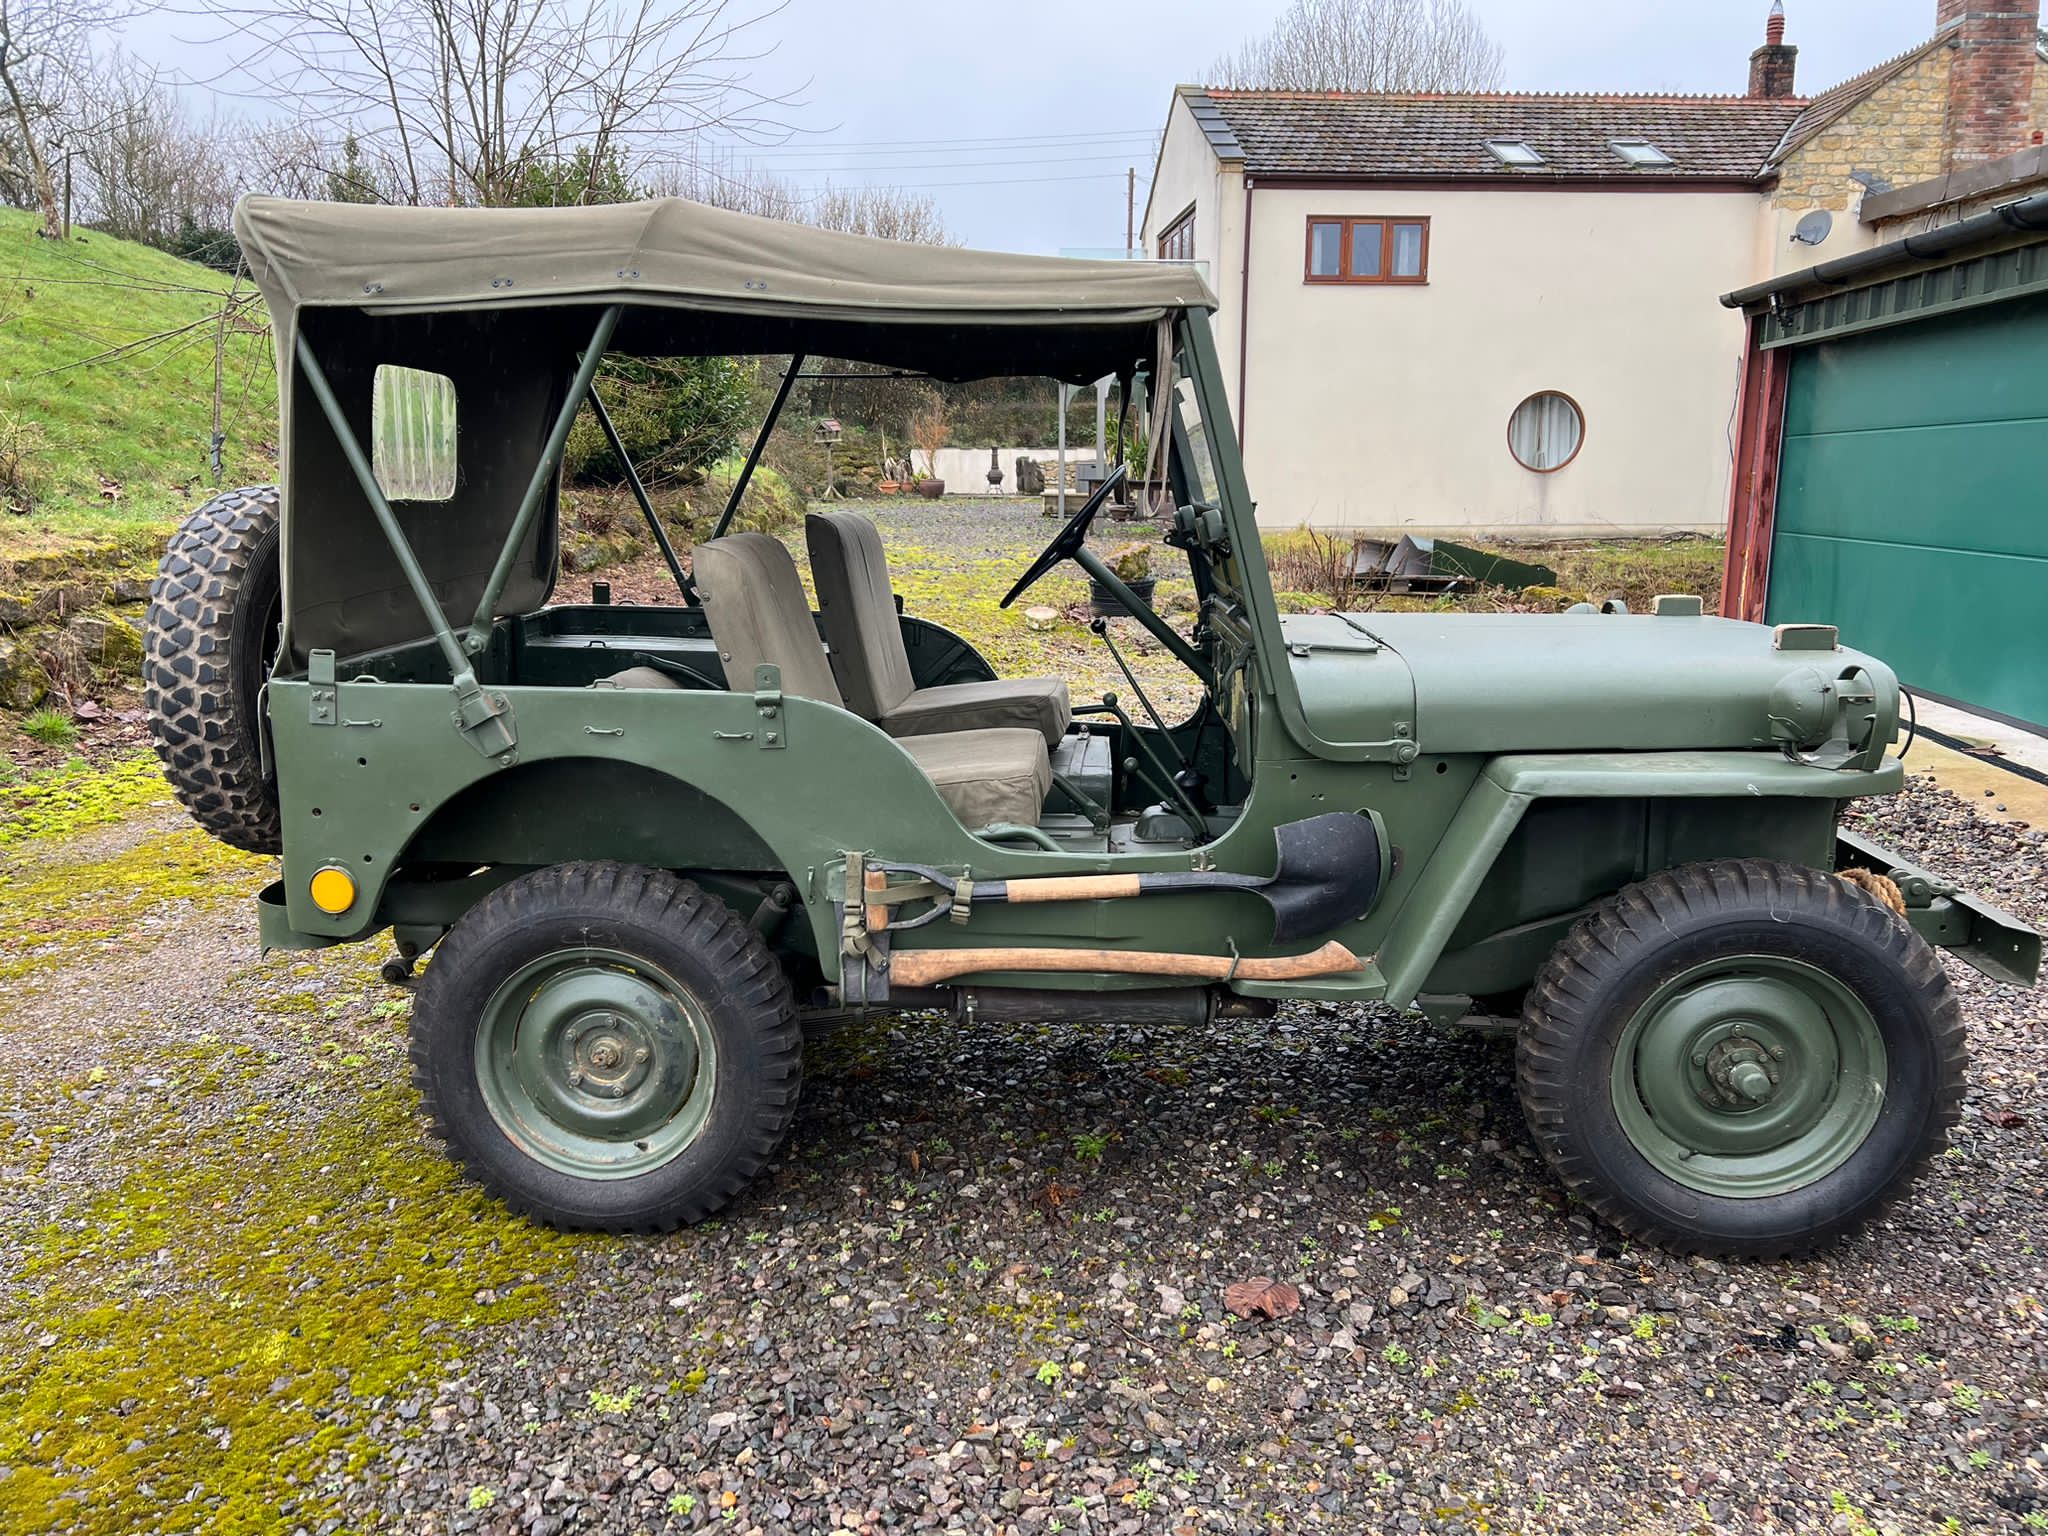 1945 Willys Jeep - Military Vehicle - Restored and raring to go... - Image 7 of 13